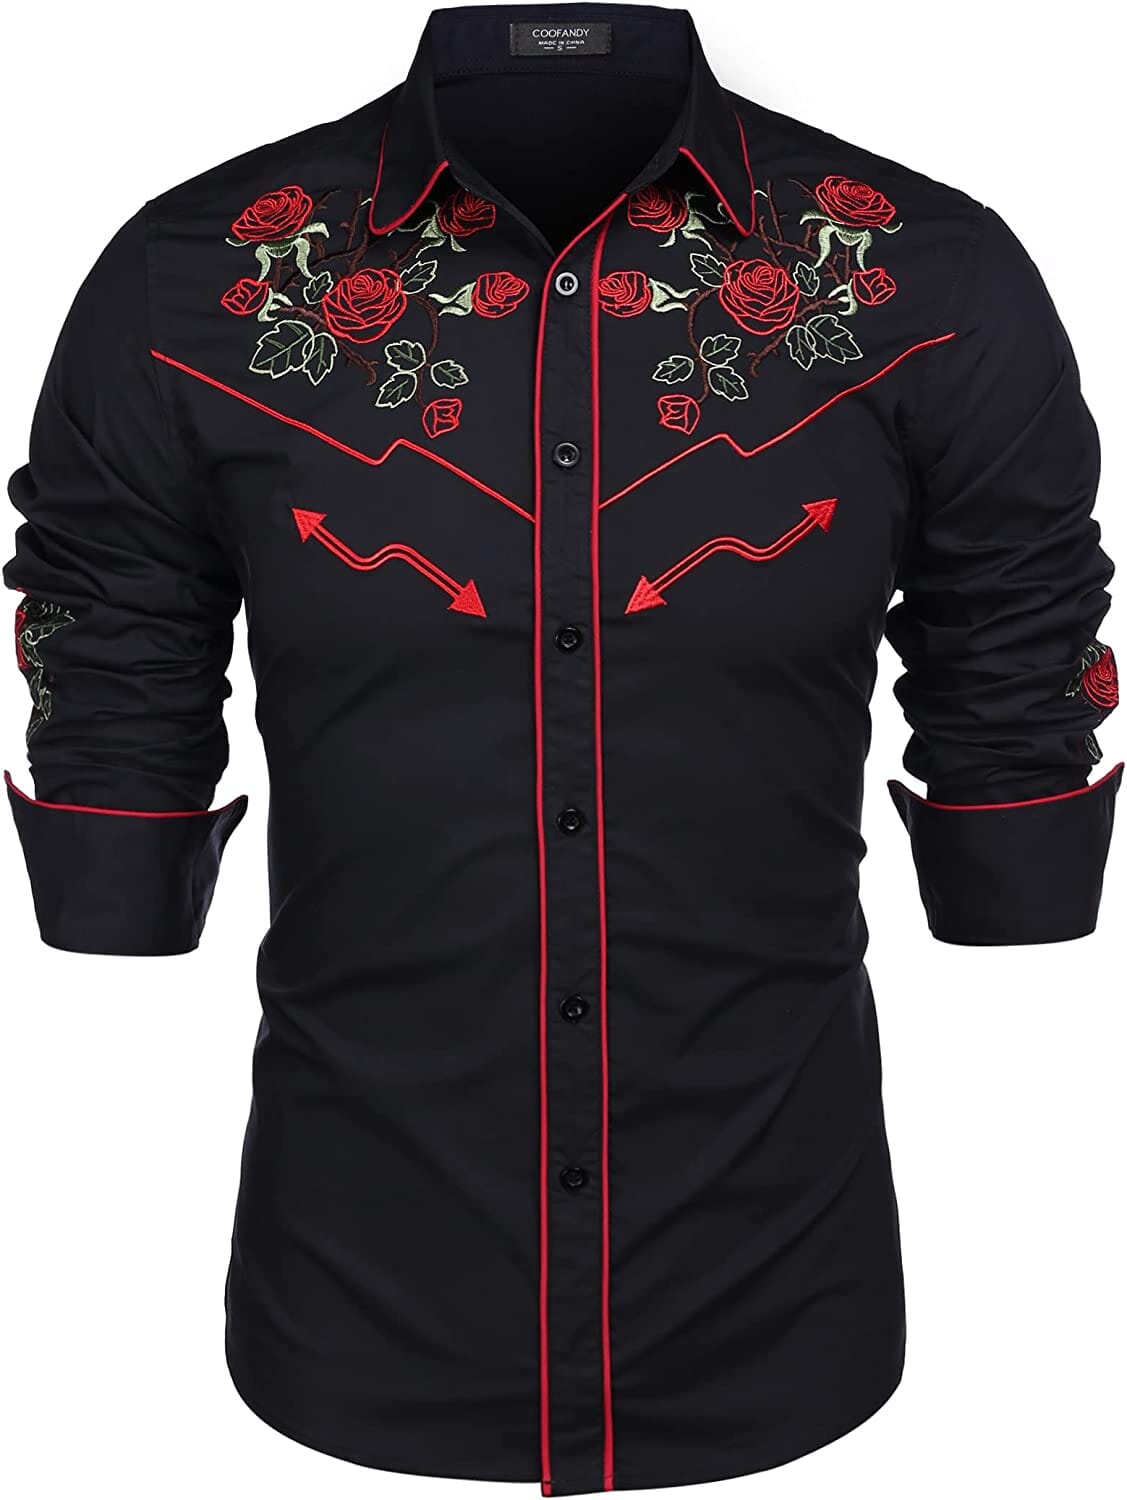 Western Cowboy Embroidered Button Down Cotton Shirt (US Only) Shirts COOFANDY Store Black (Rose) M 